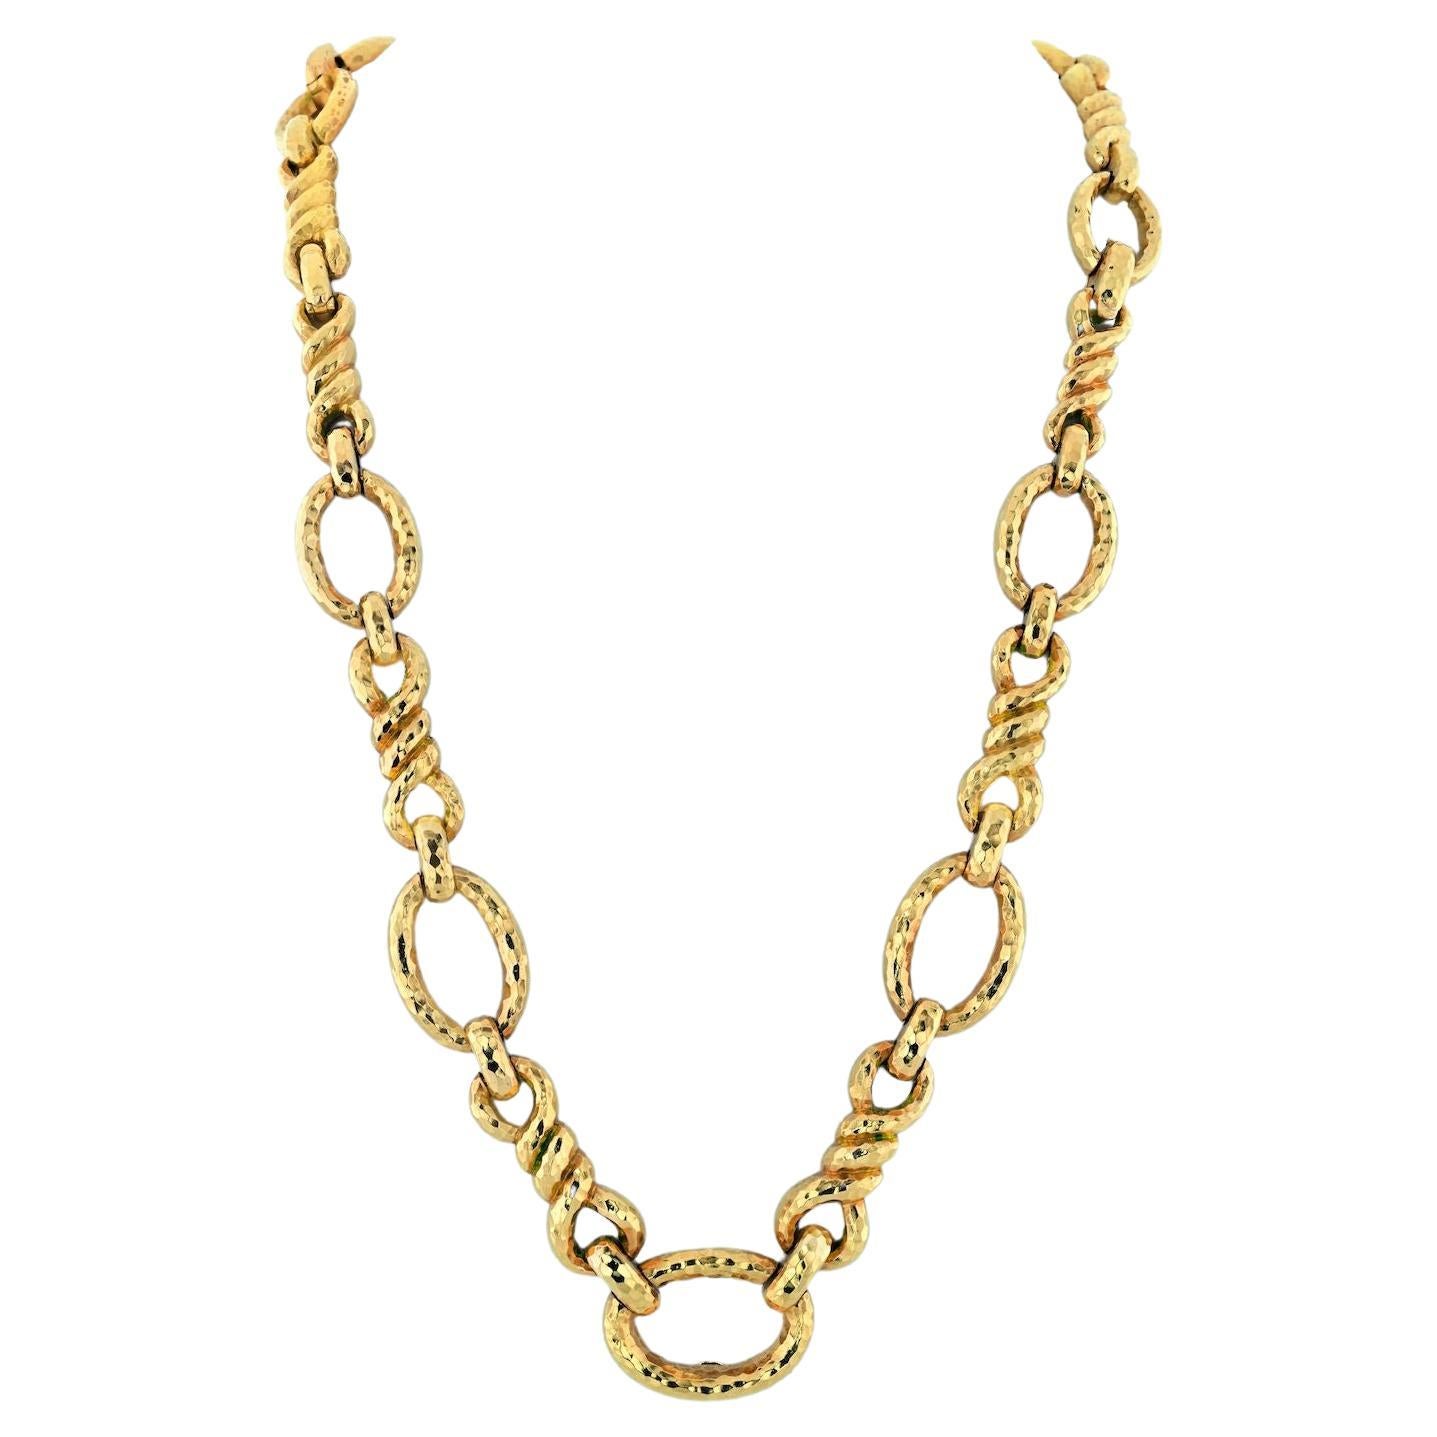 David Webb 18K Yellow Gold Link 28 inches Convertible Chain Necklace